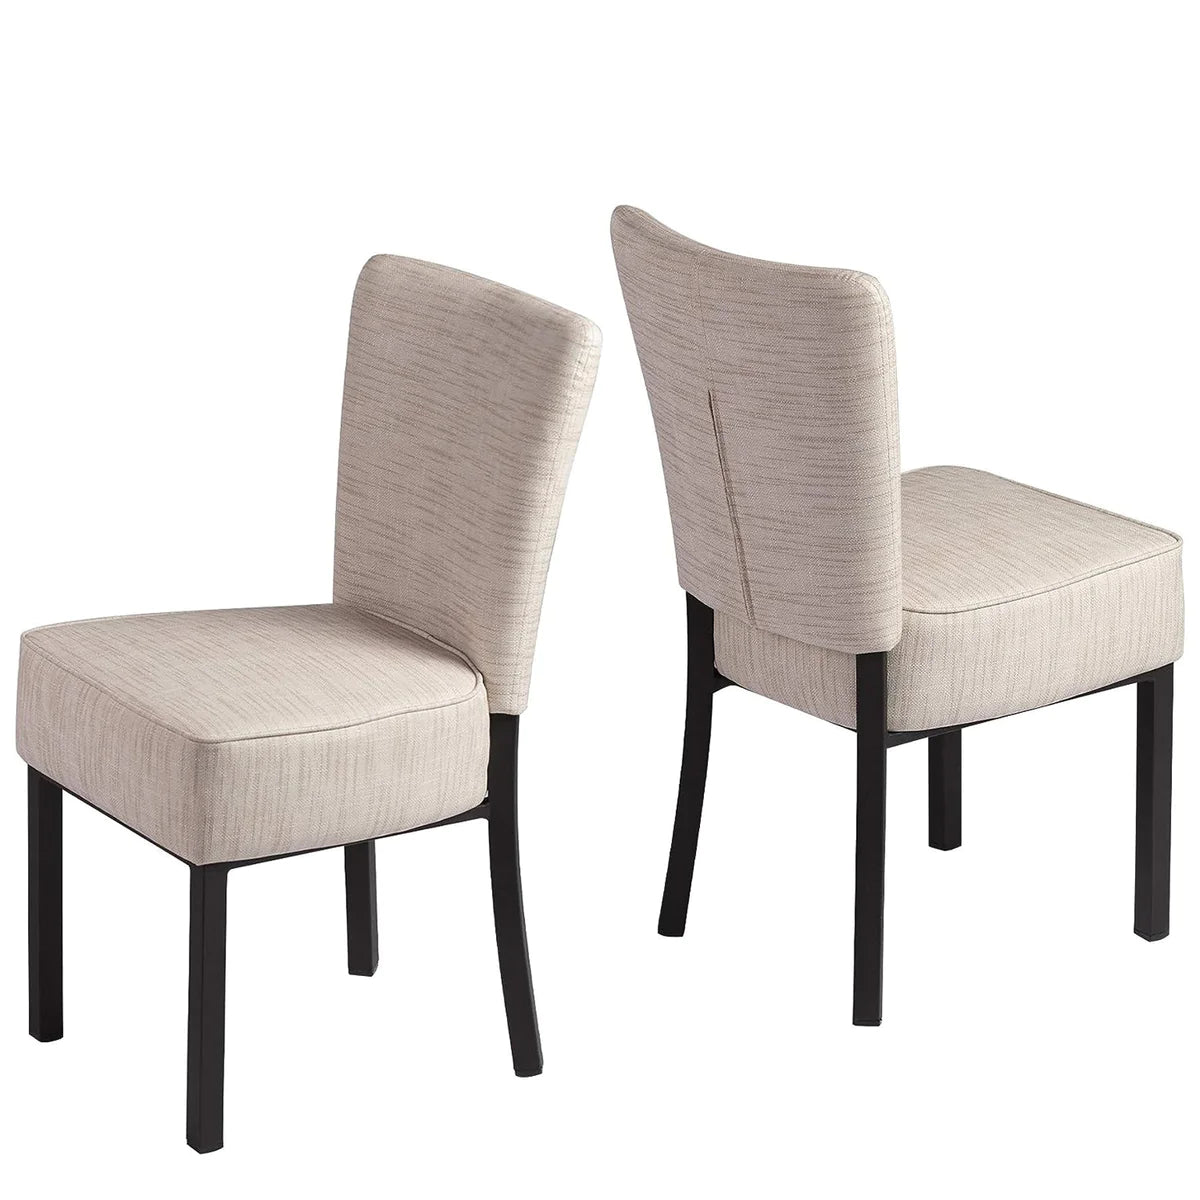 2 Set of Upholstered Chairs PU Leather Modern Dining Room Chairs, Soft, Multiple colors